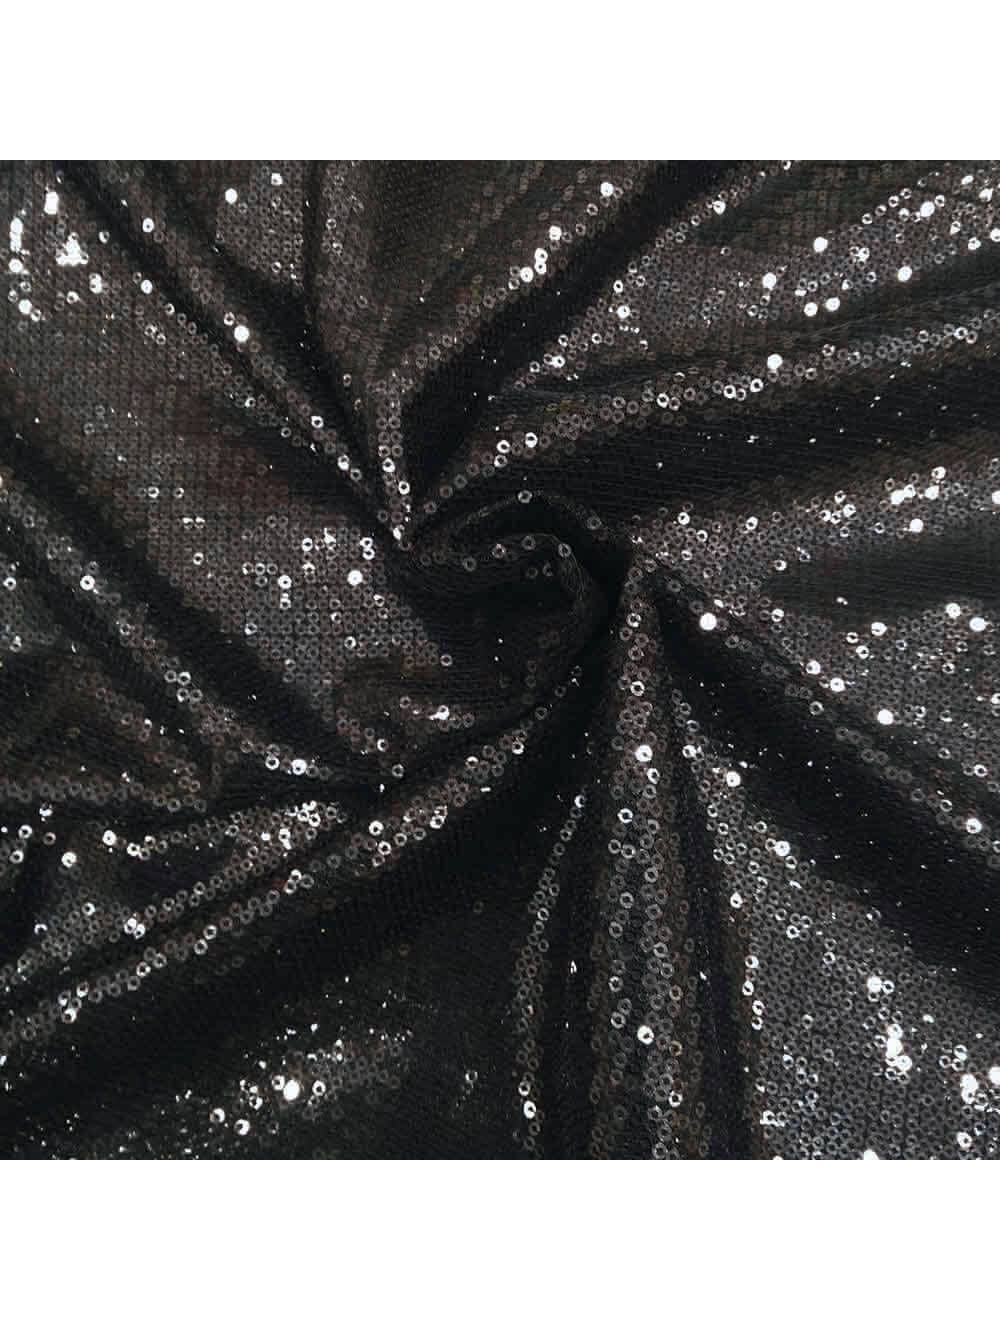 Black Net Fabric with Sequins Embroidery